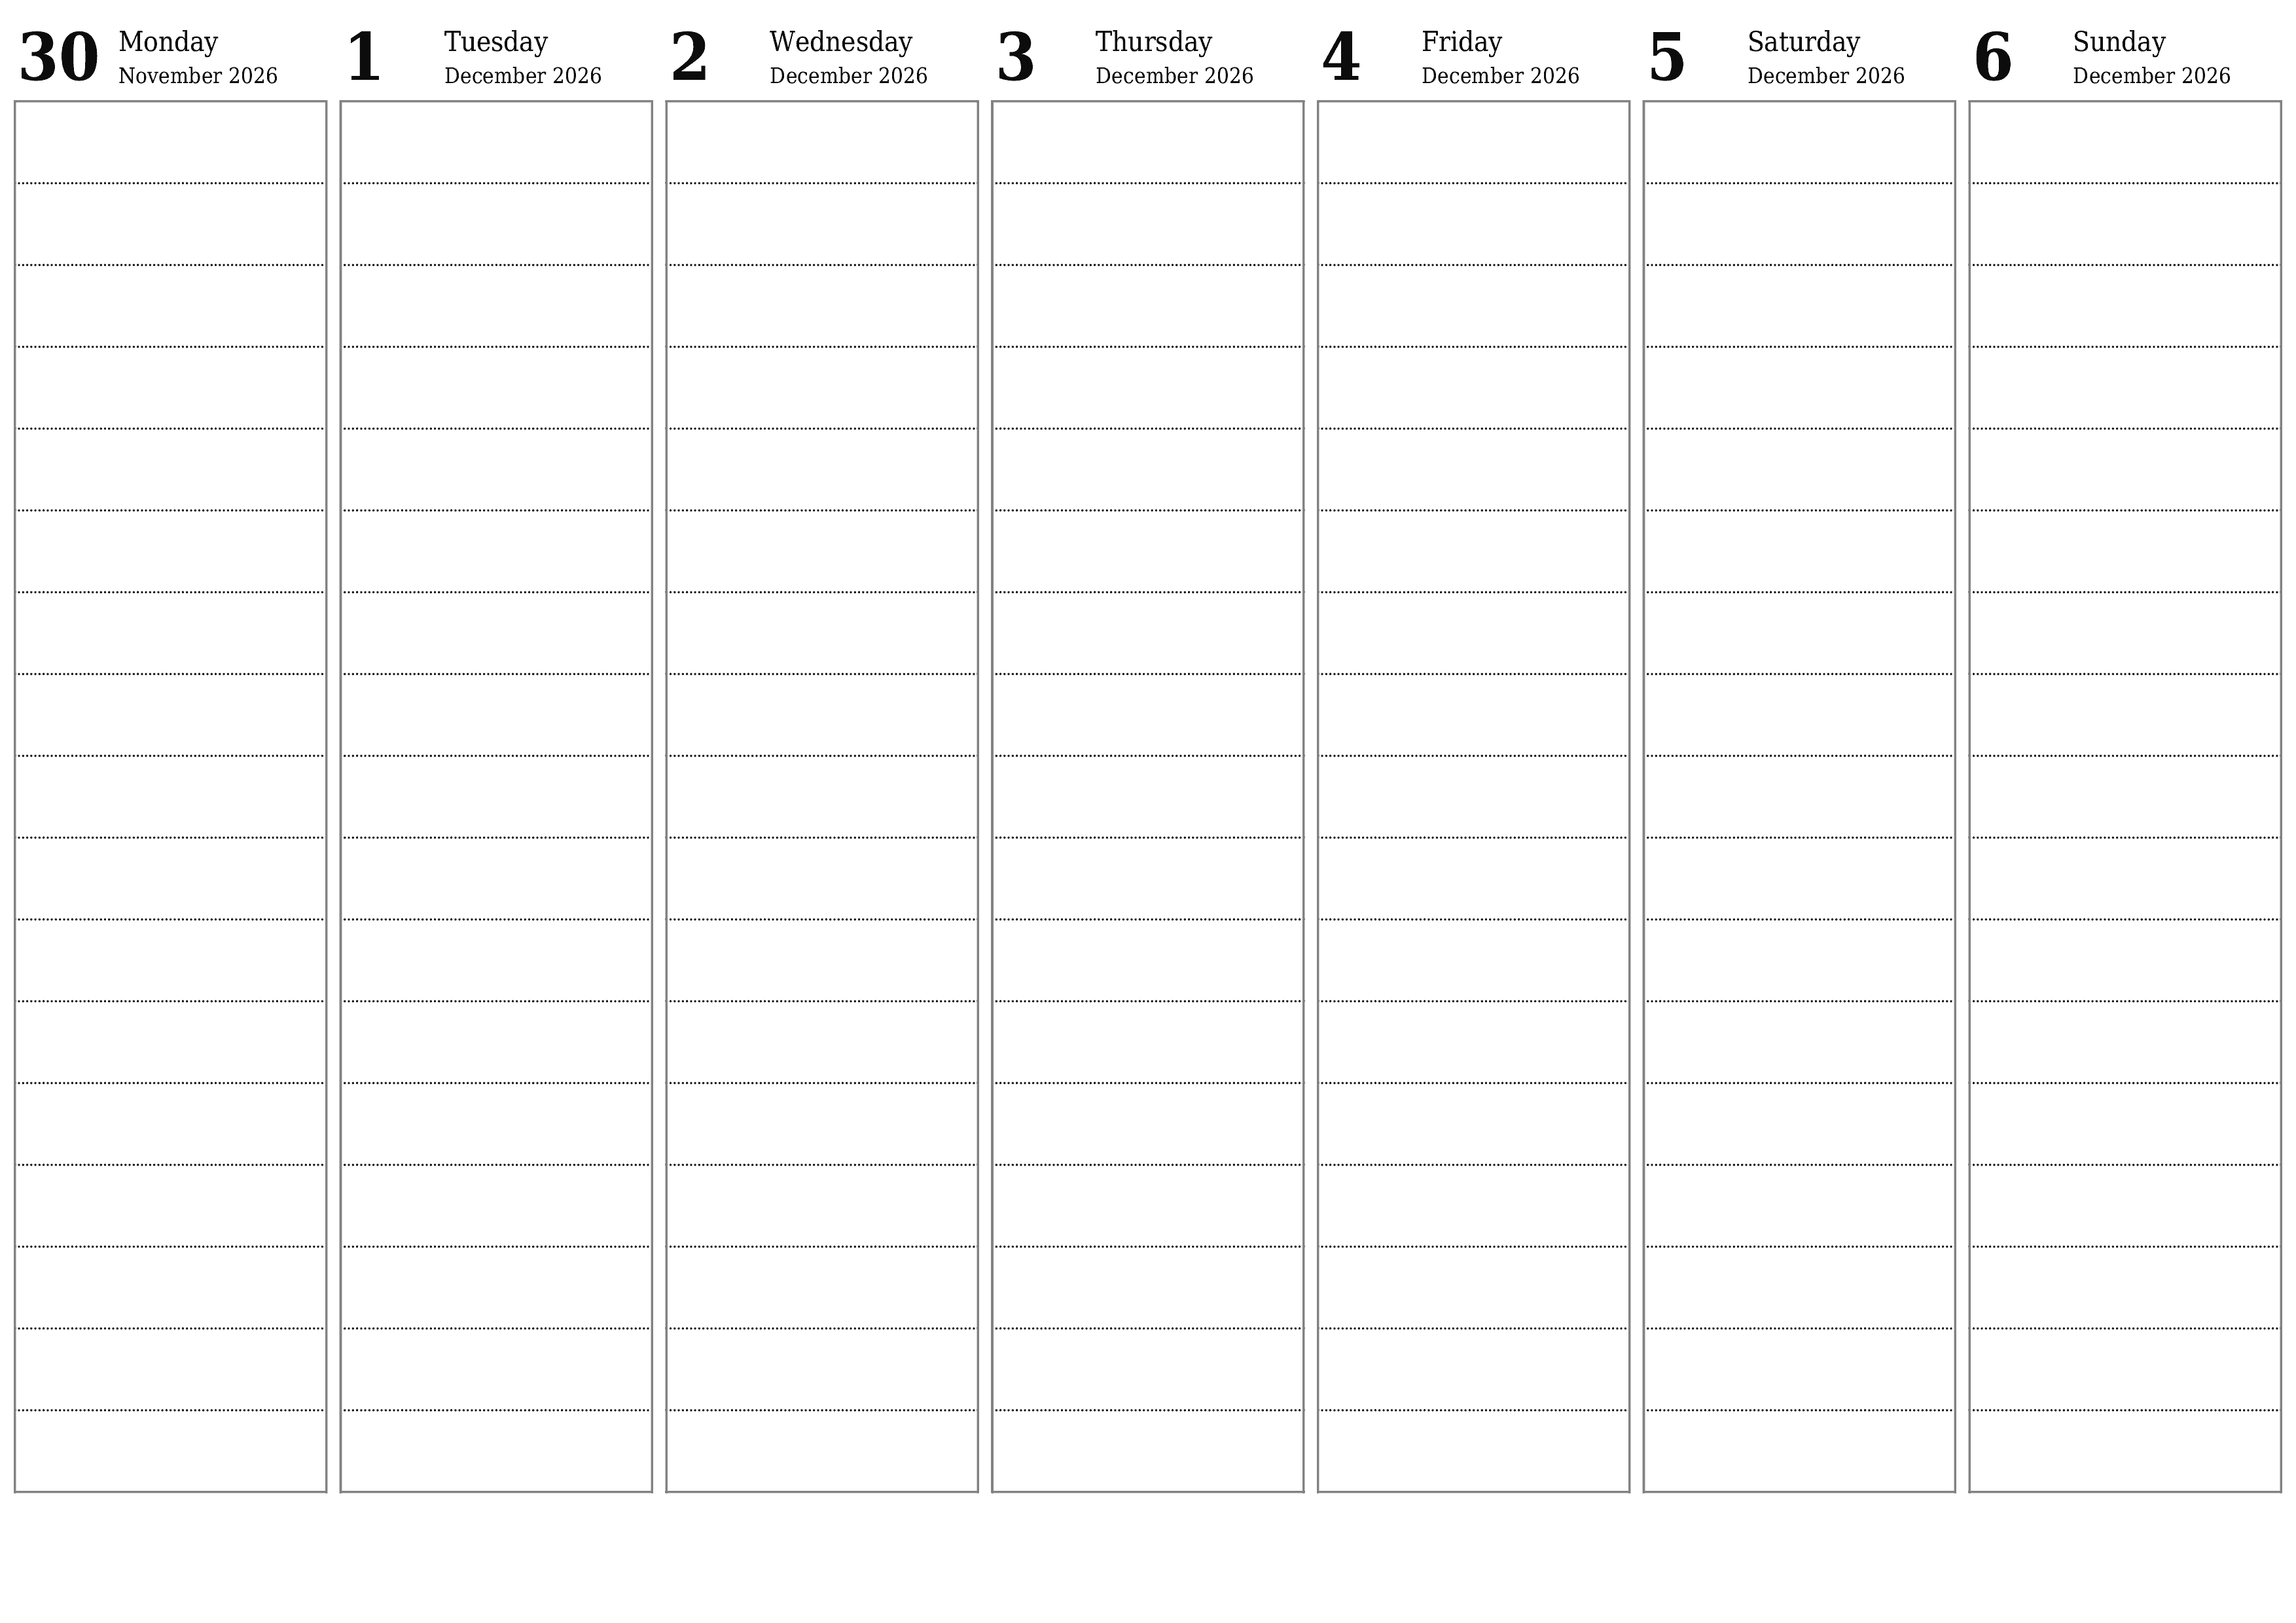 Blank weekly printable calendar and planner for week December 2026 with notes, save and print to PDF PNG English